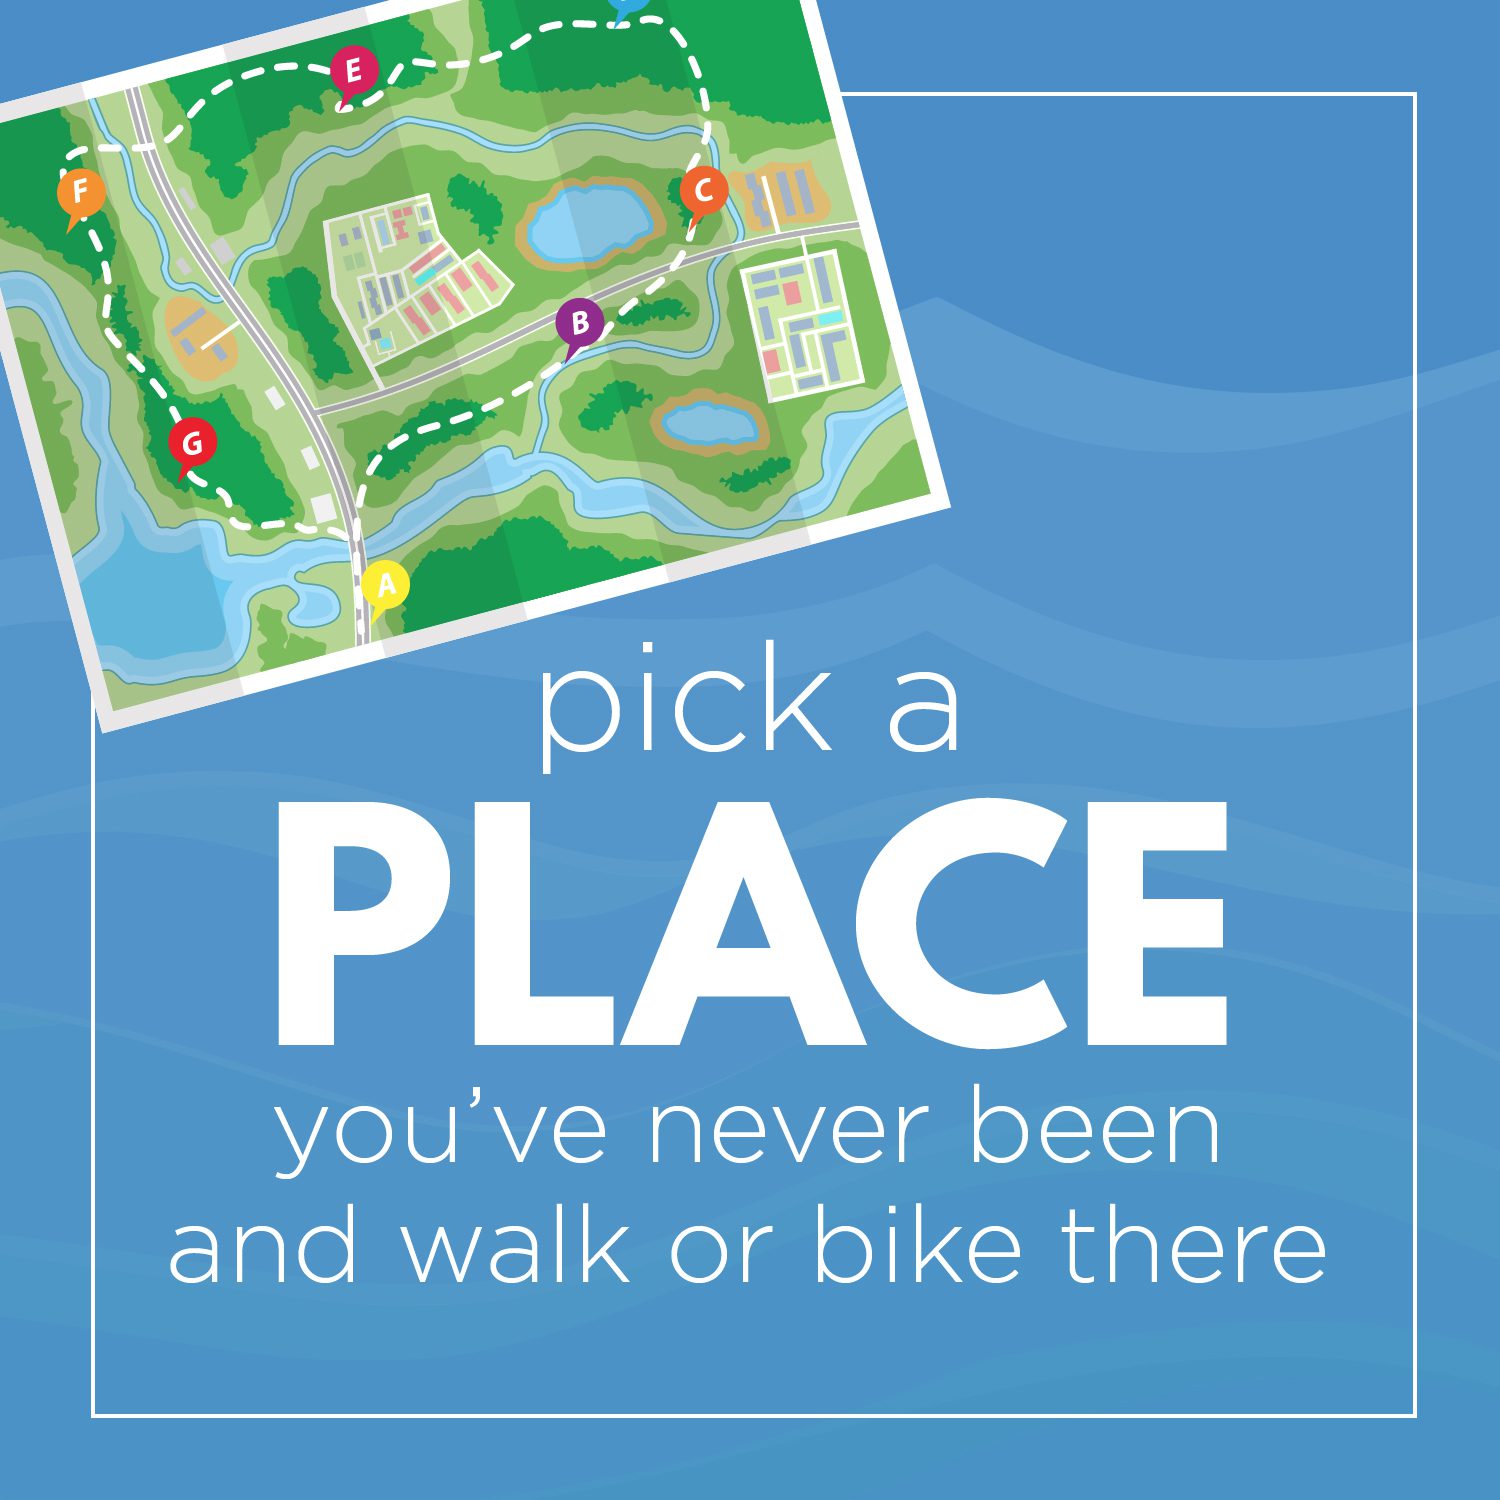 Pick a place you've never been and walk or bike there